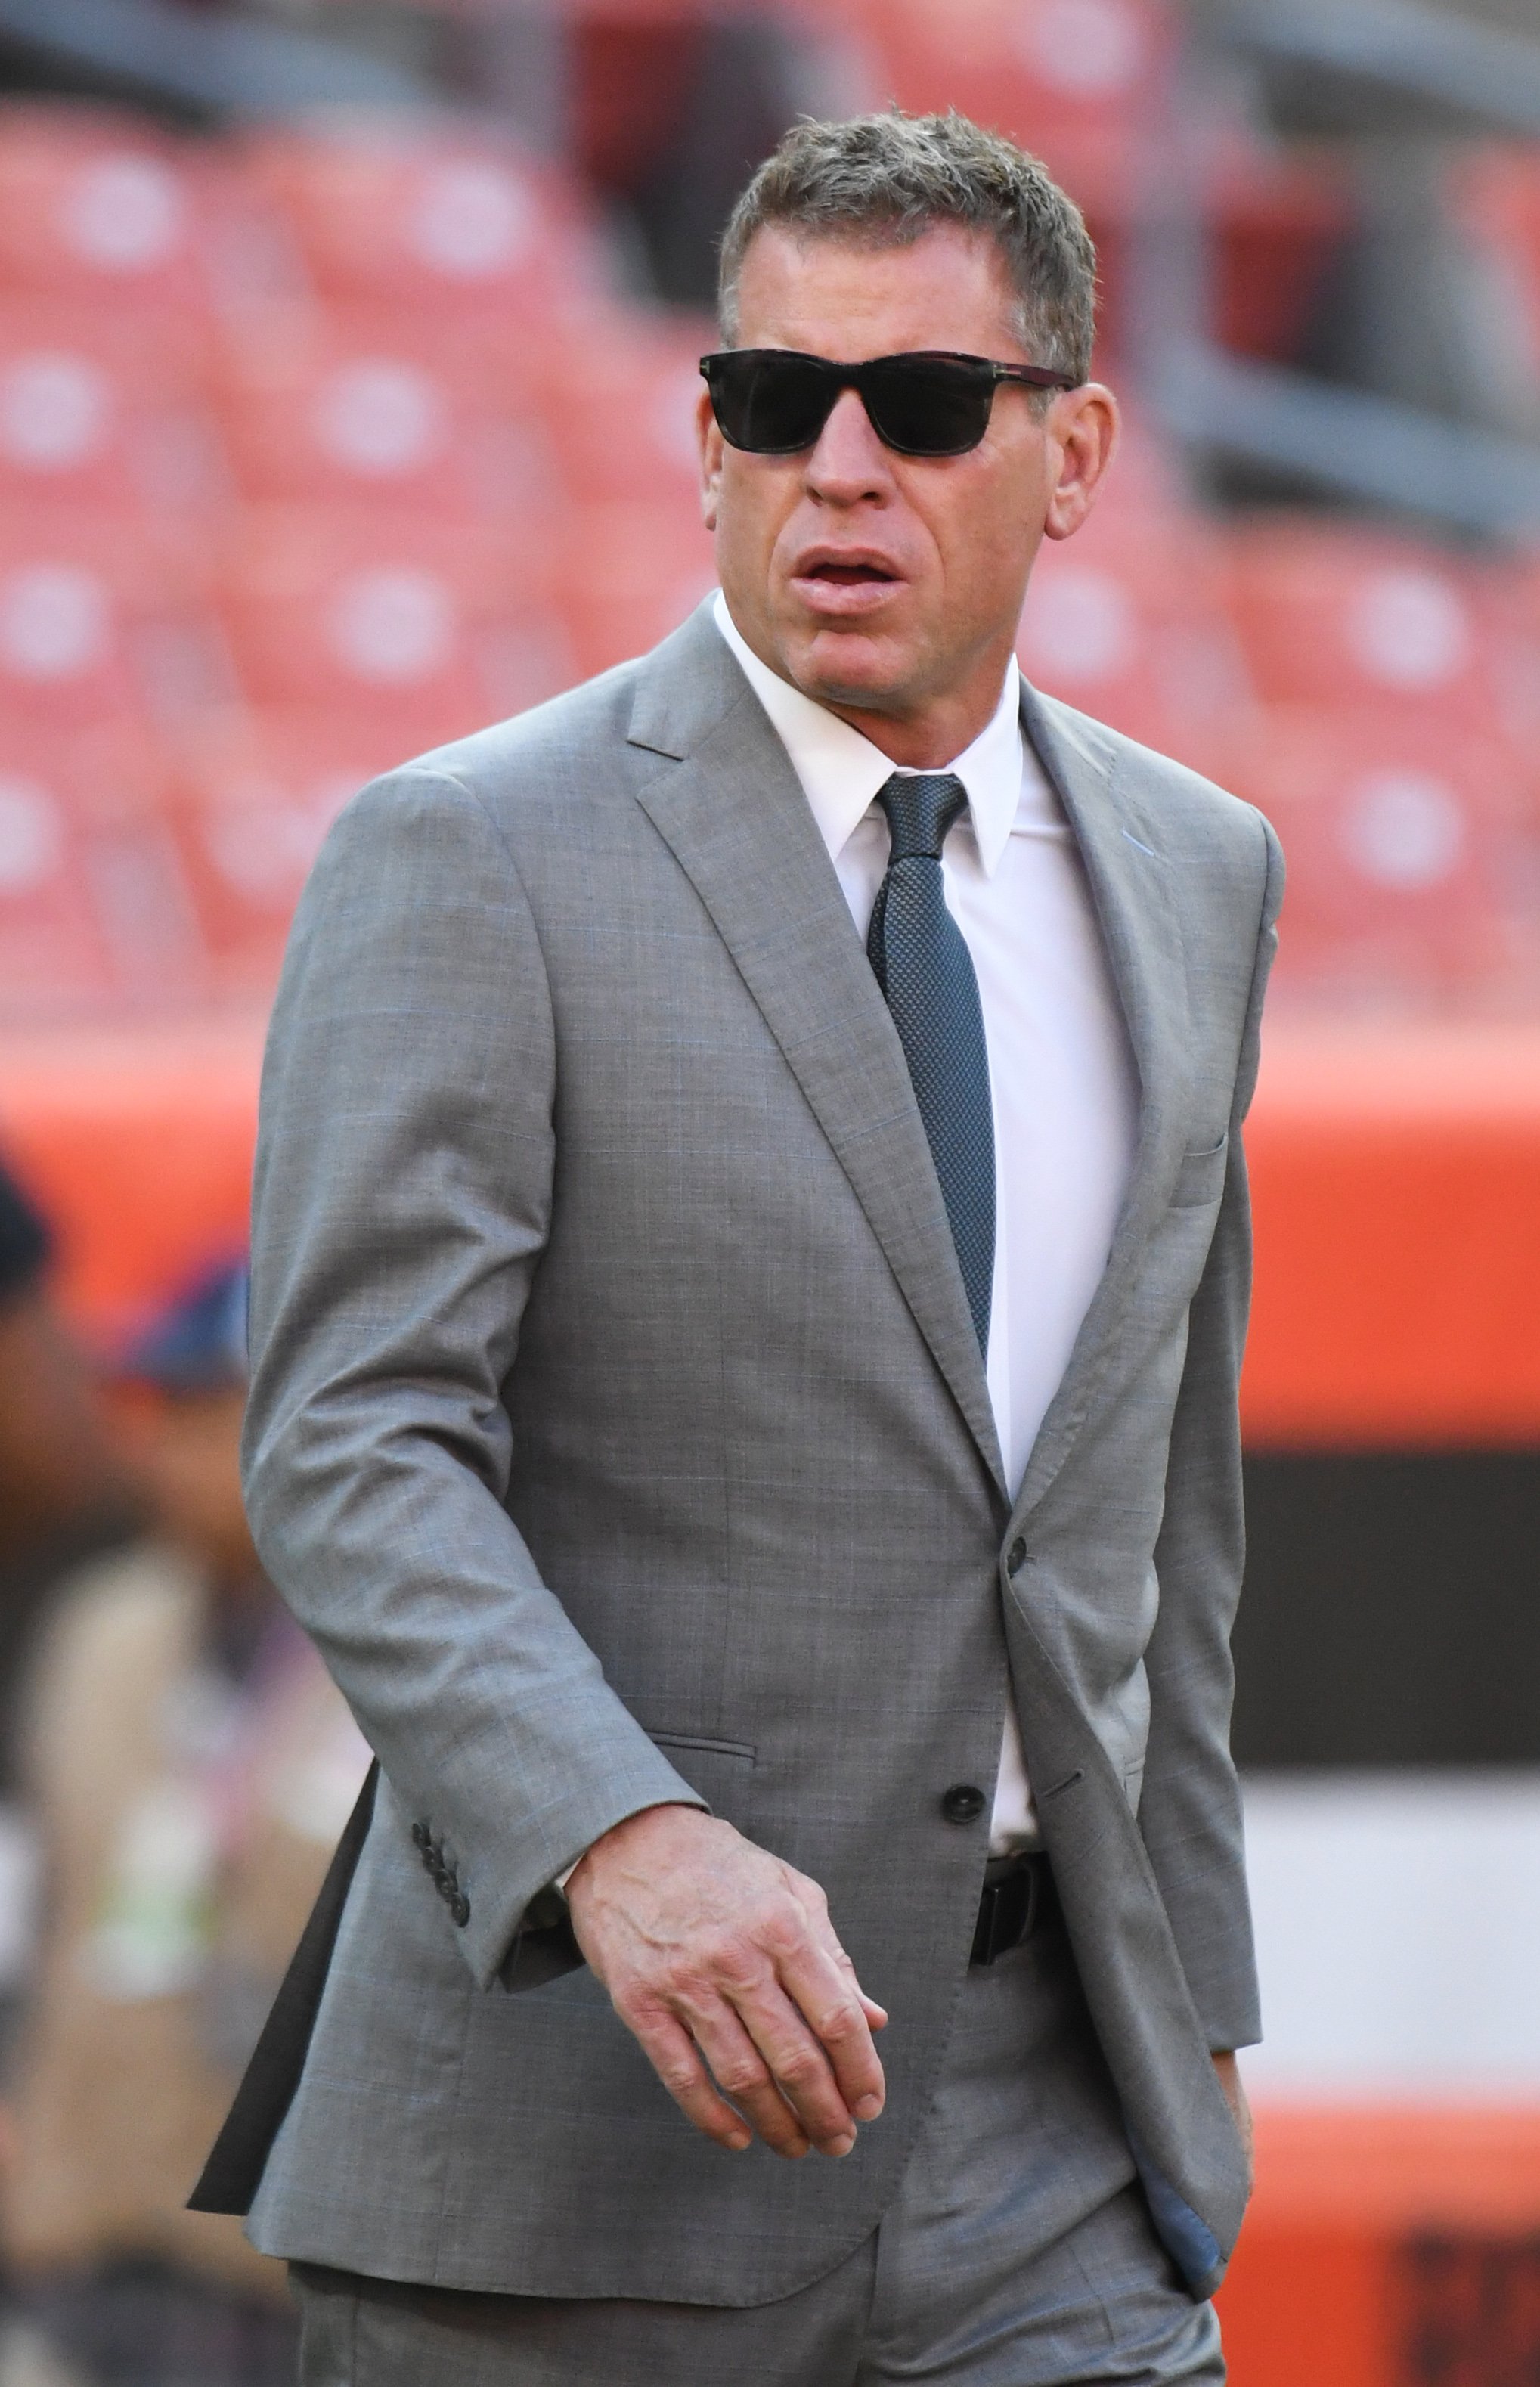 Troy Aikman walks onto the field prior to a preseason game between the Philadelphia Eagles and Cleveland Browns on August 23, 2018, at FirstEnergy Stadium in Cleveland, Ohio | Source: Getty Images